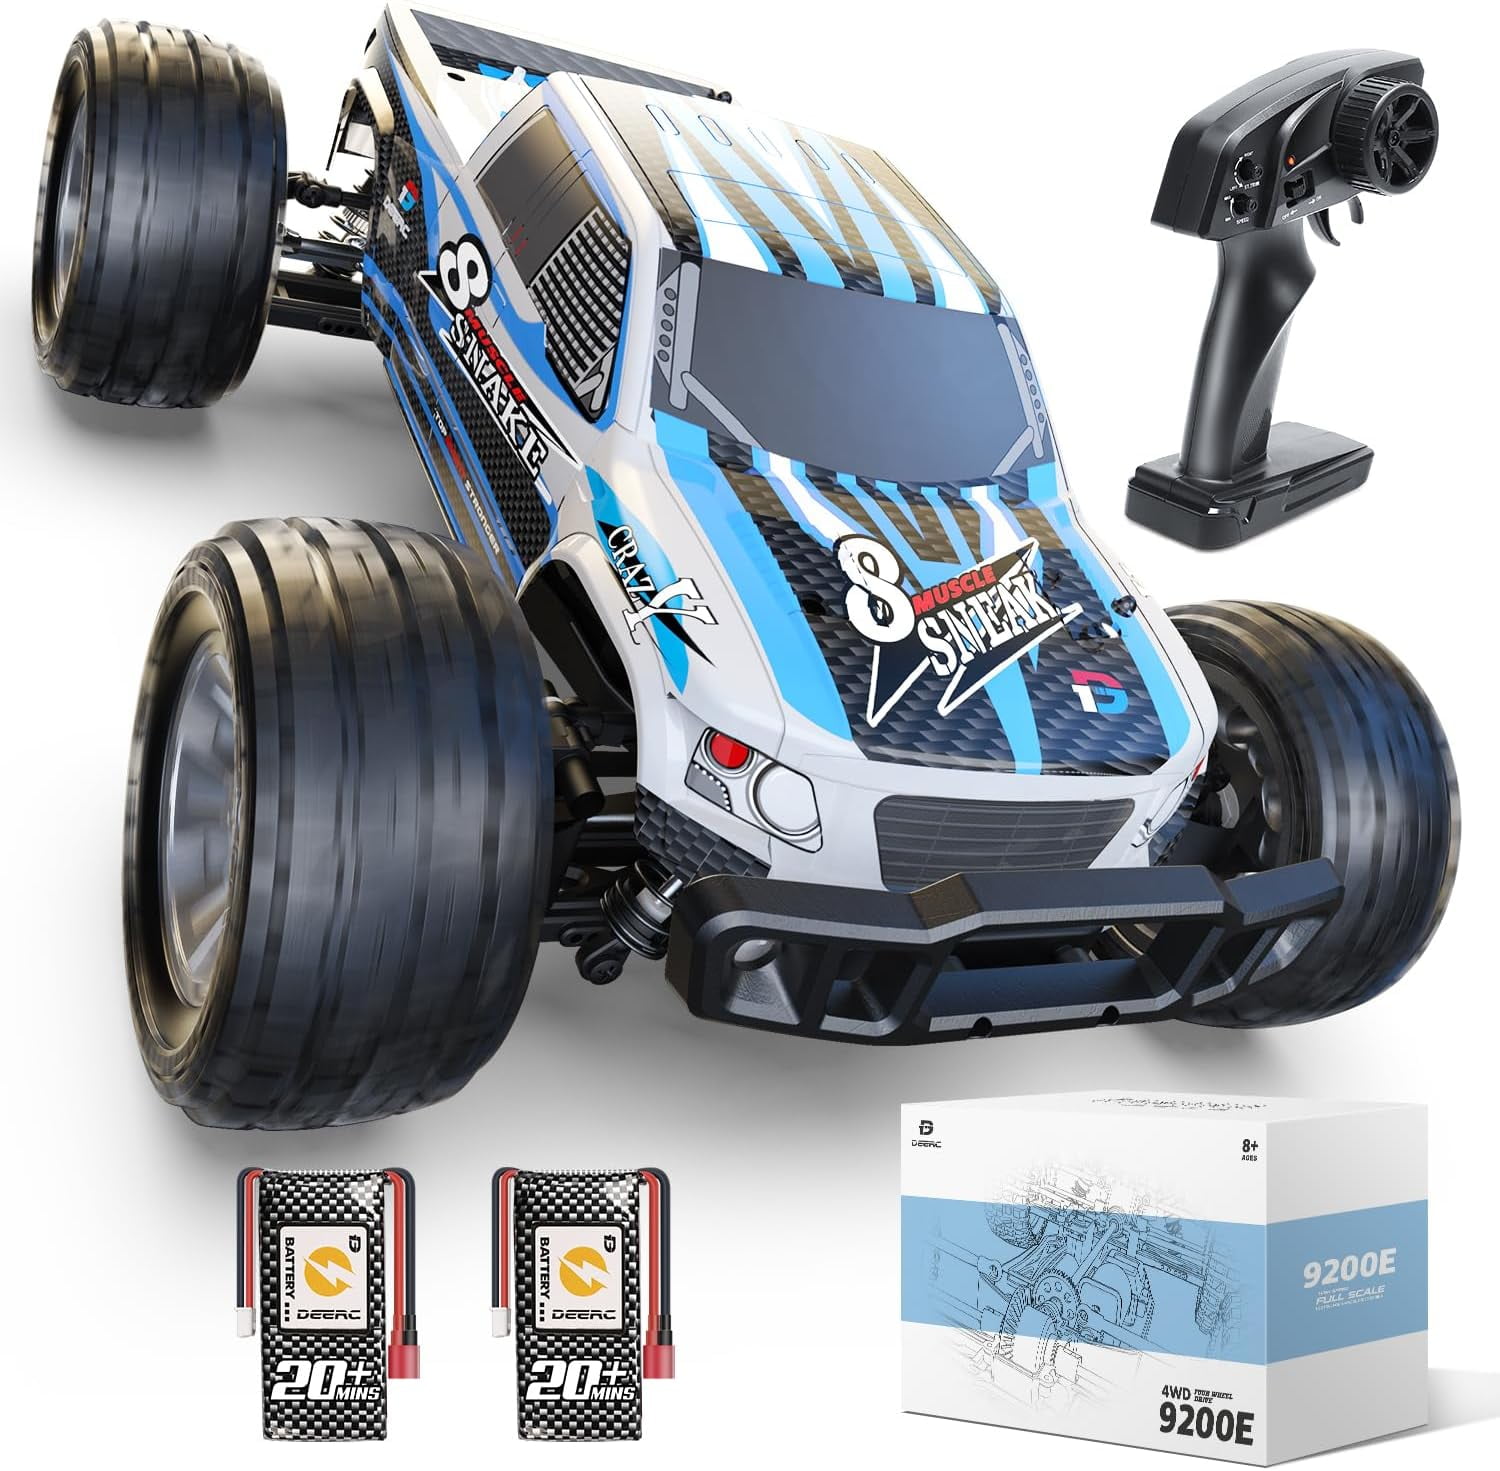 SUPPORT POUR VOITURE RC 1/10 - 1/8 SCALE 2 BUGGY SHOCK